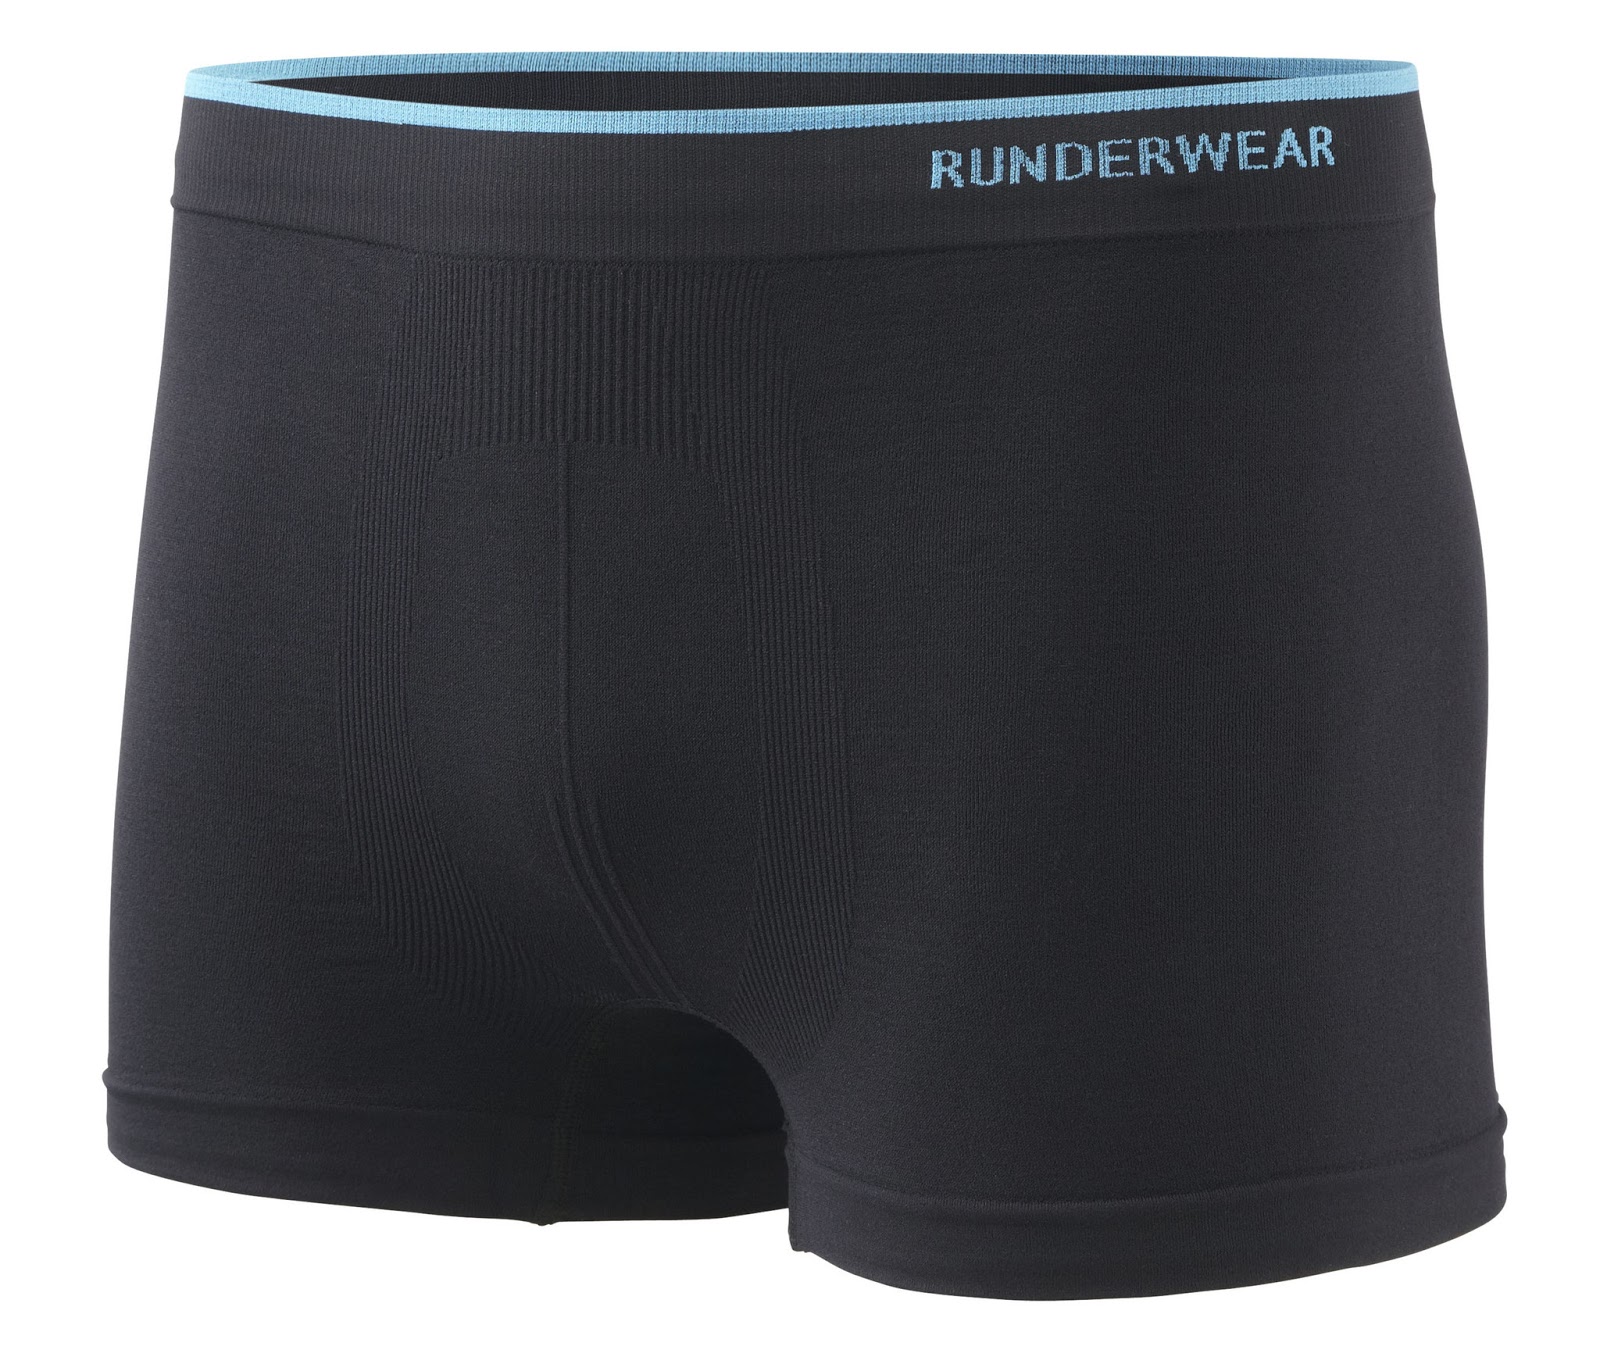 Running Without Injuries: Runderwear Review